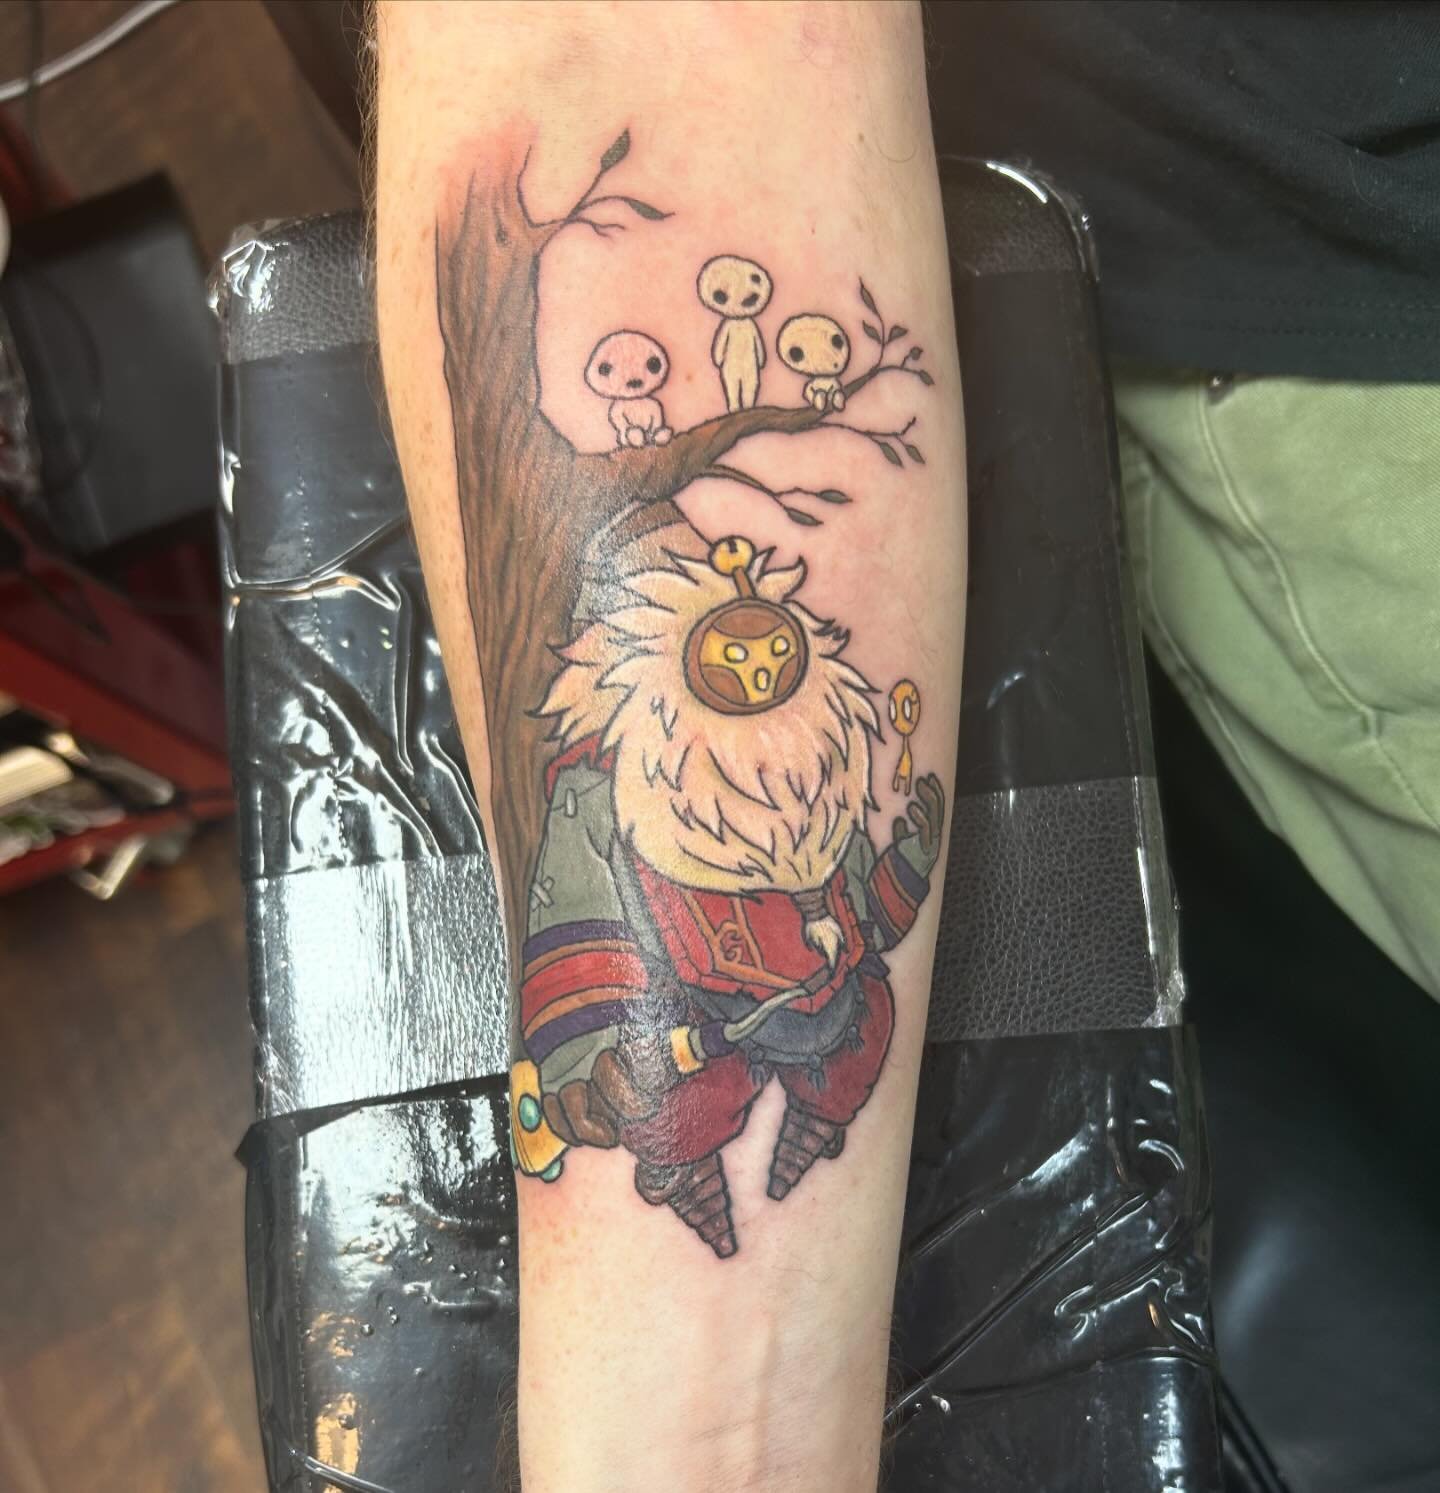 So excited to share this League of Legends/Ghibli mashup! Bard from LoL with Kodama from Princess Mononoke. And for his first tattoo! Thanks for toughing it out and for bringing in such a cool idea. ✨ 

I am back in Detroit! Now booking end of May th